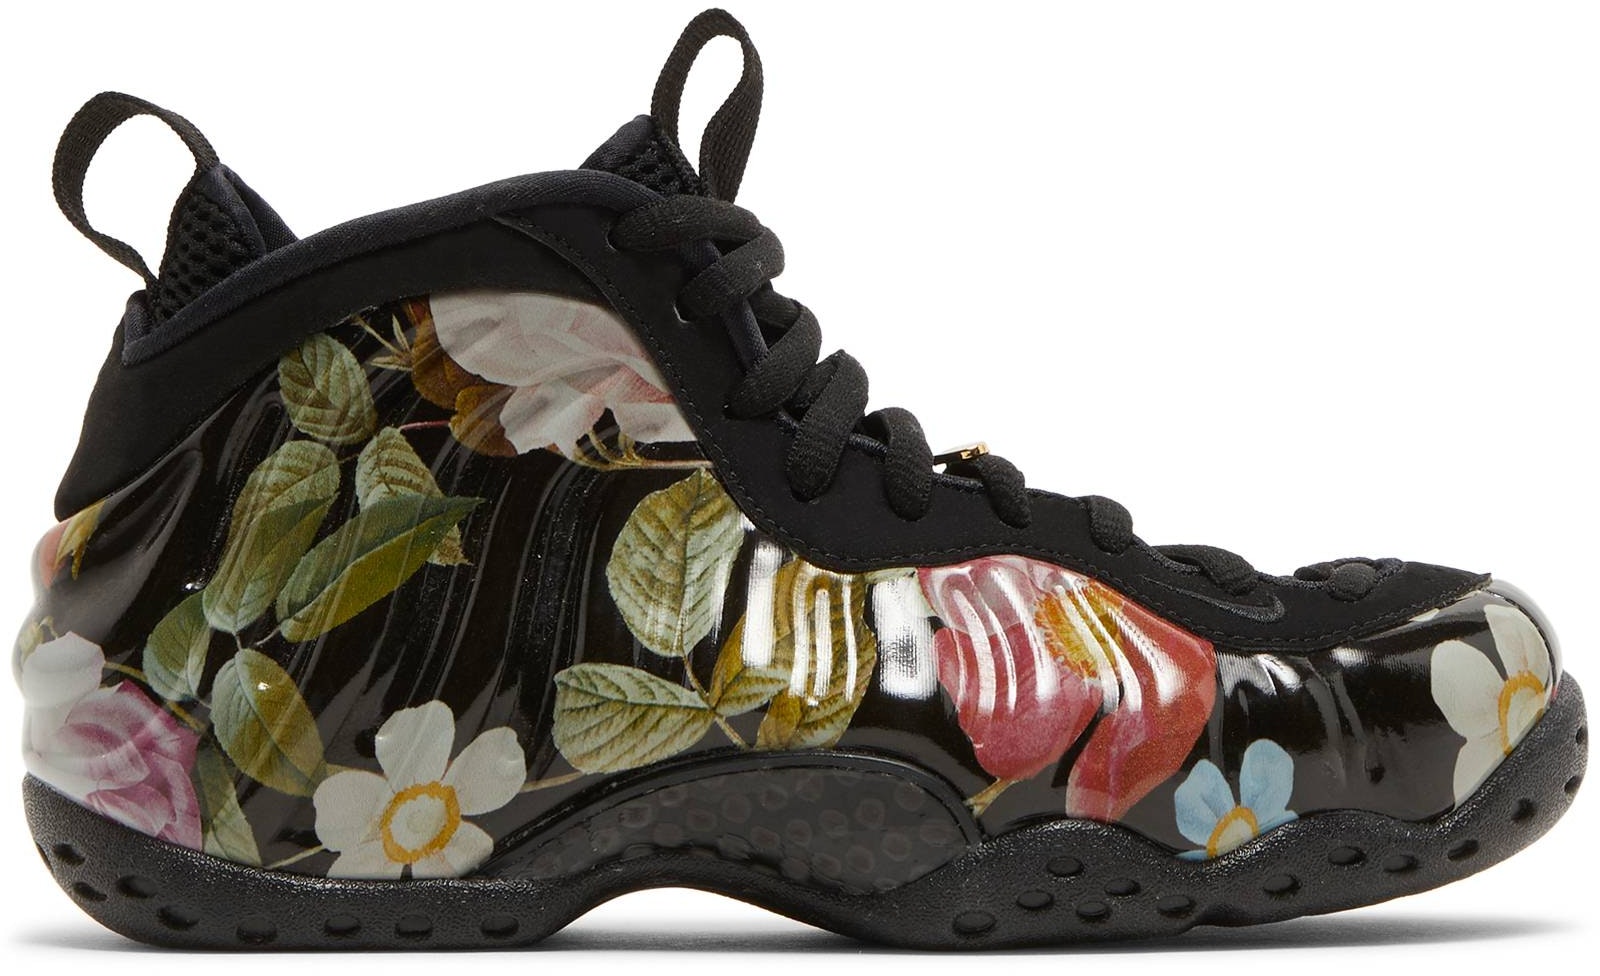 Nike Air Foamposite One 'Floral' (WMNS) - AA3963-002 - Novelship